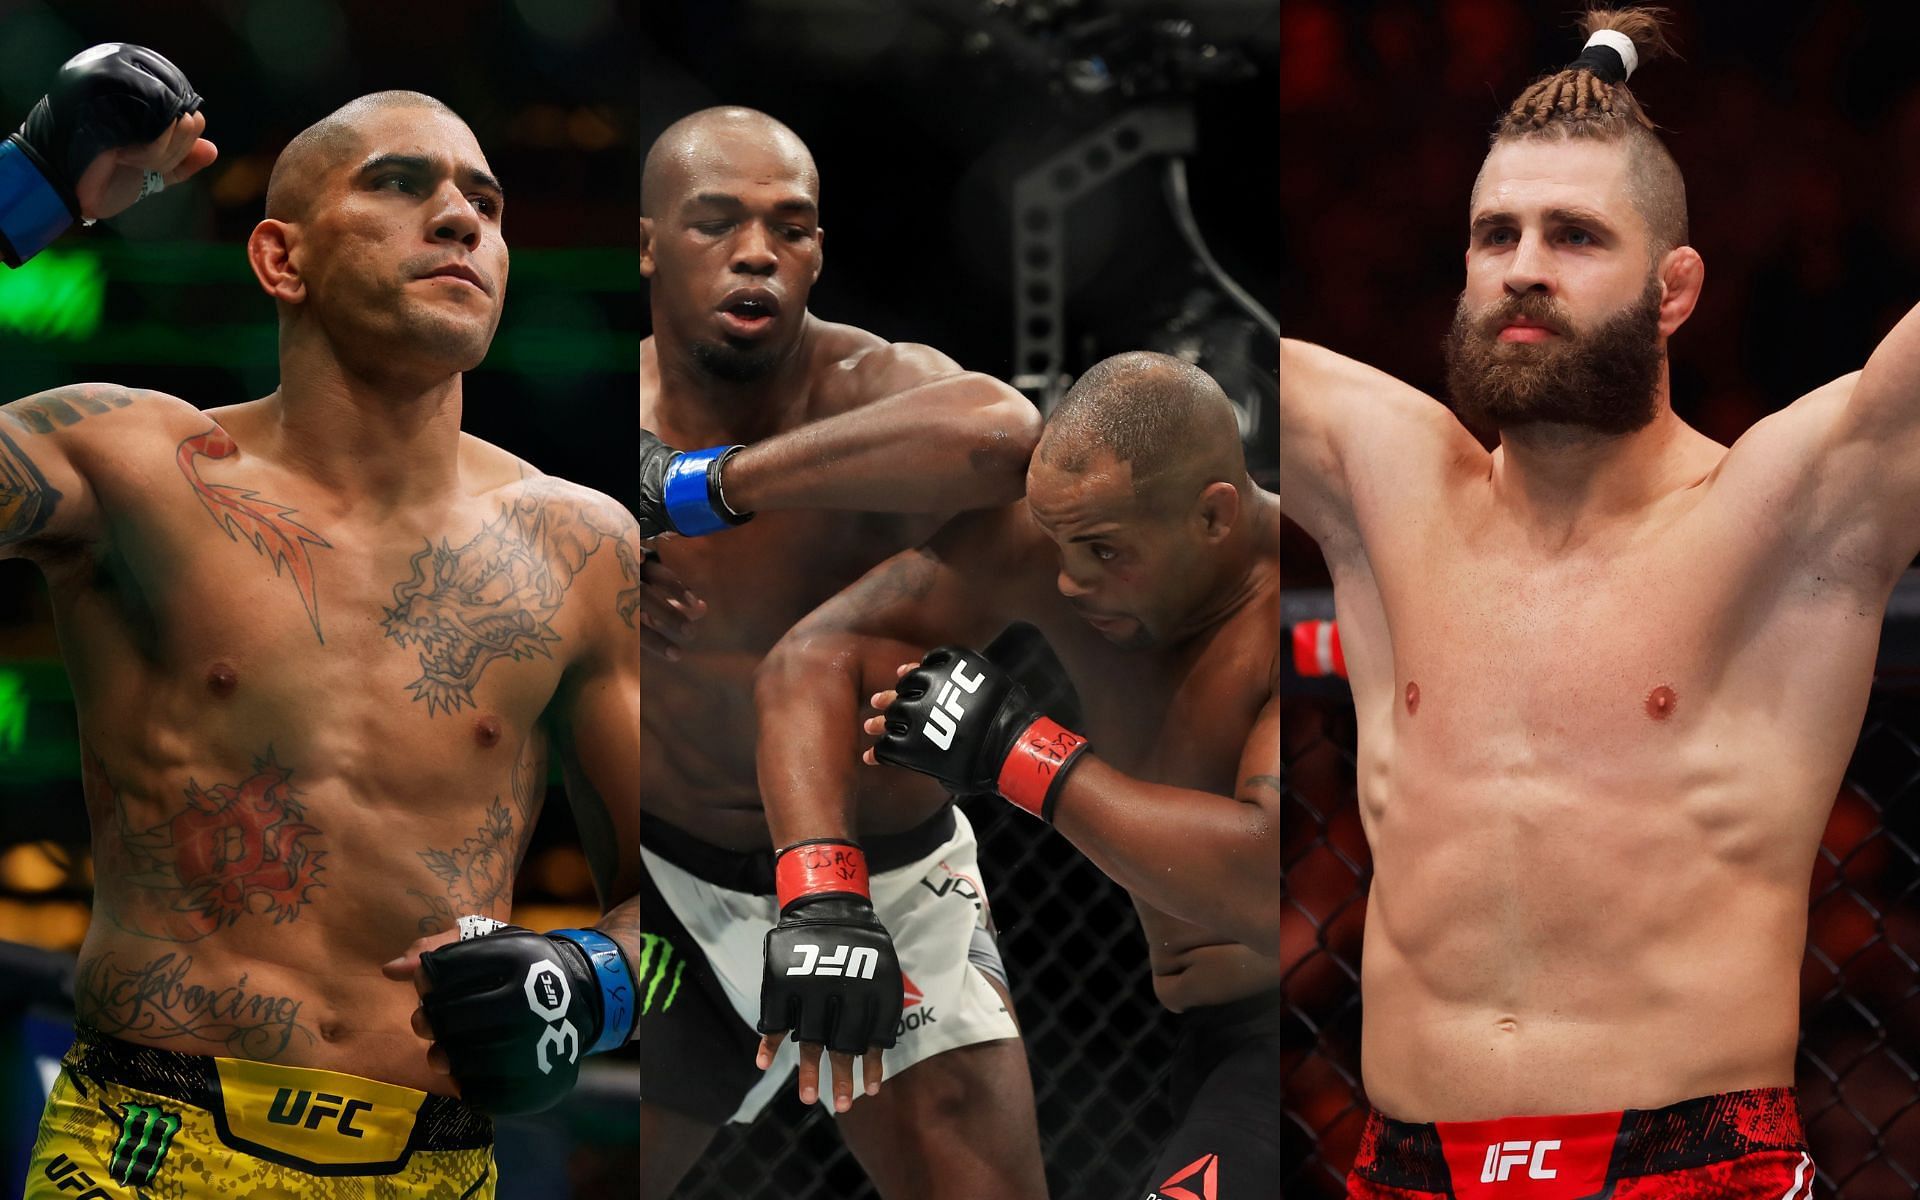 Be it recent UFC light heavyweight champions like Alex Pereira (far left) and Jiri Prochazka (far right) or former 205-pounders like Jon Jones and Daniel Cormier (middle), the UFC light heavyweight division has consistently been ruled by fearsome champions [Images courtesy: Getty Images]